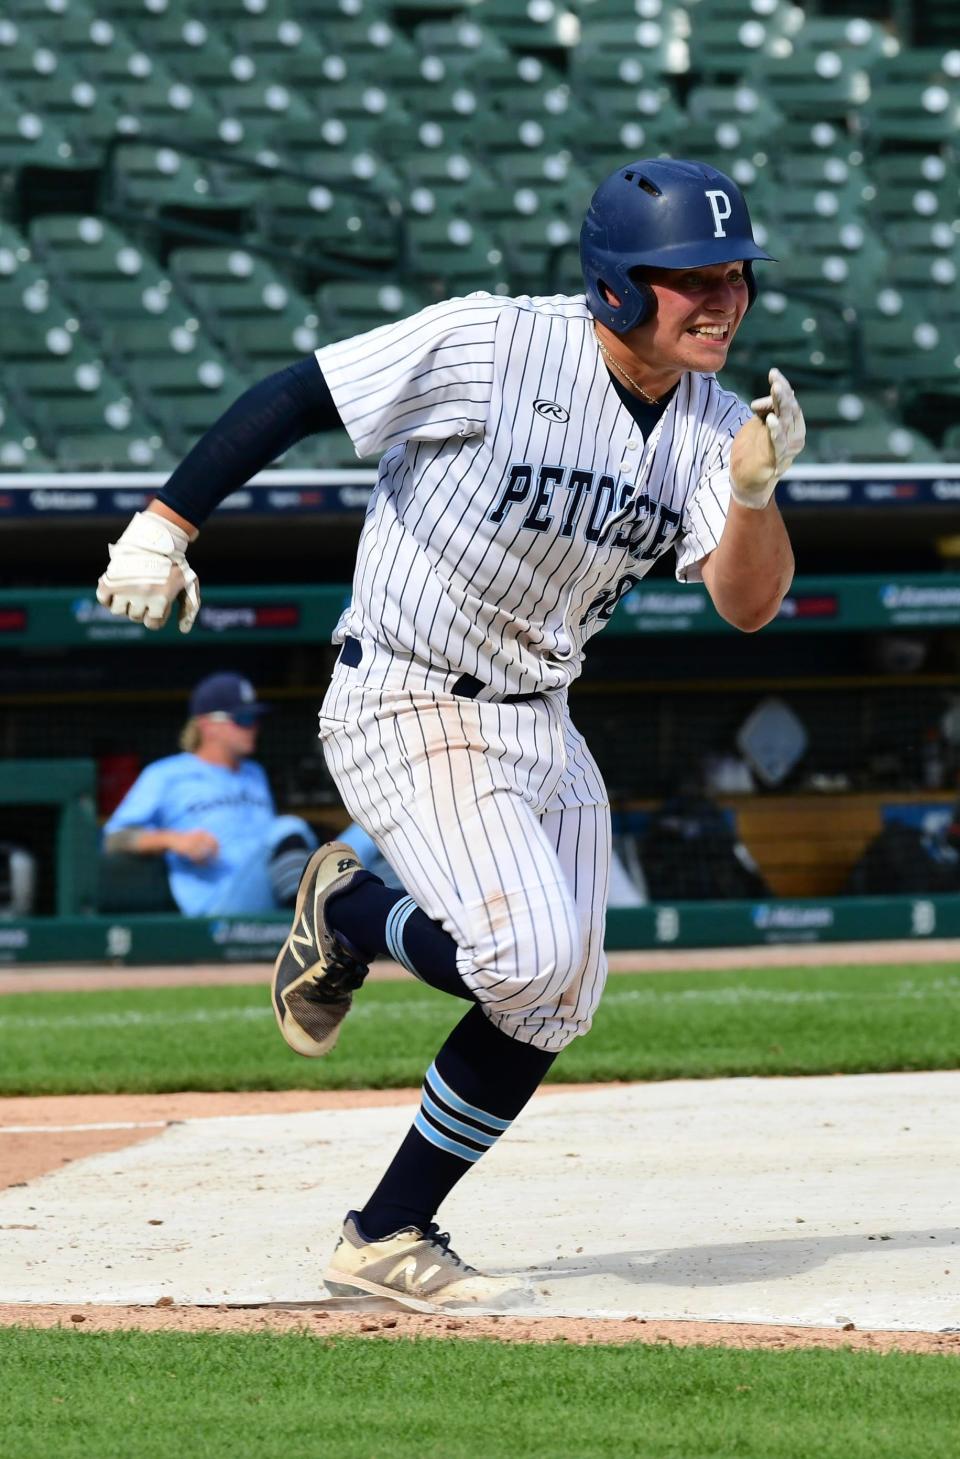 Petoskey's Kolton Horn has kept up a strong year at the plate this summer and will take on some good competition this weekend in a home tourney.